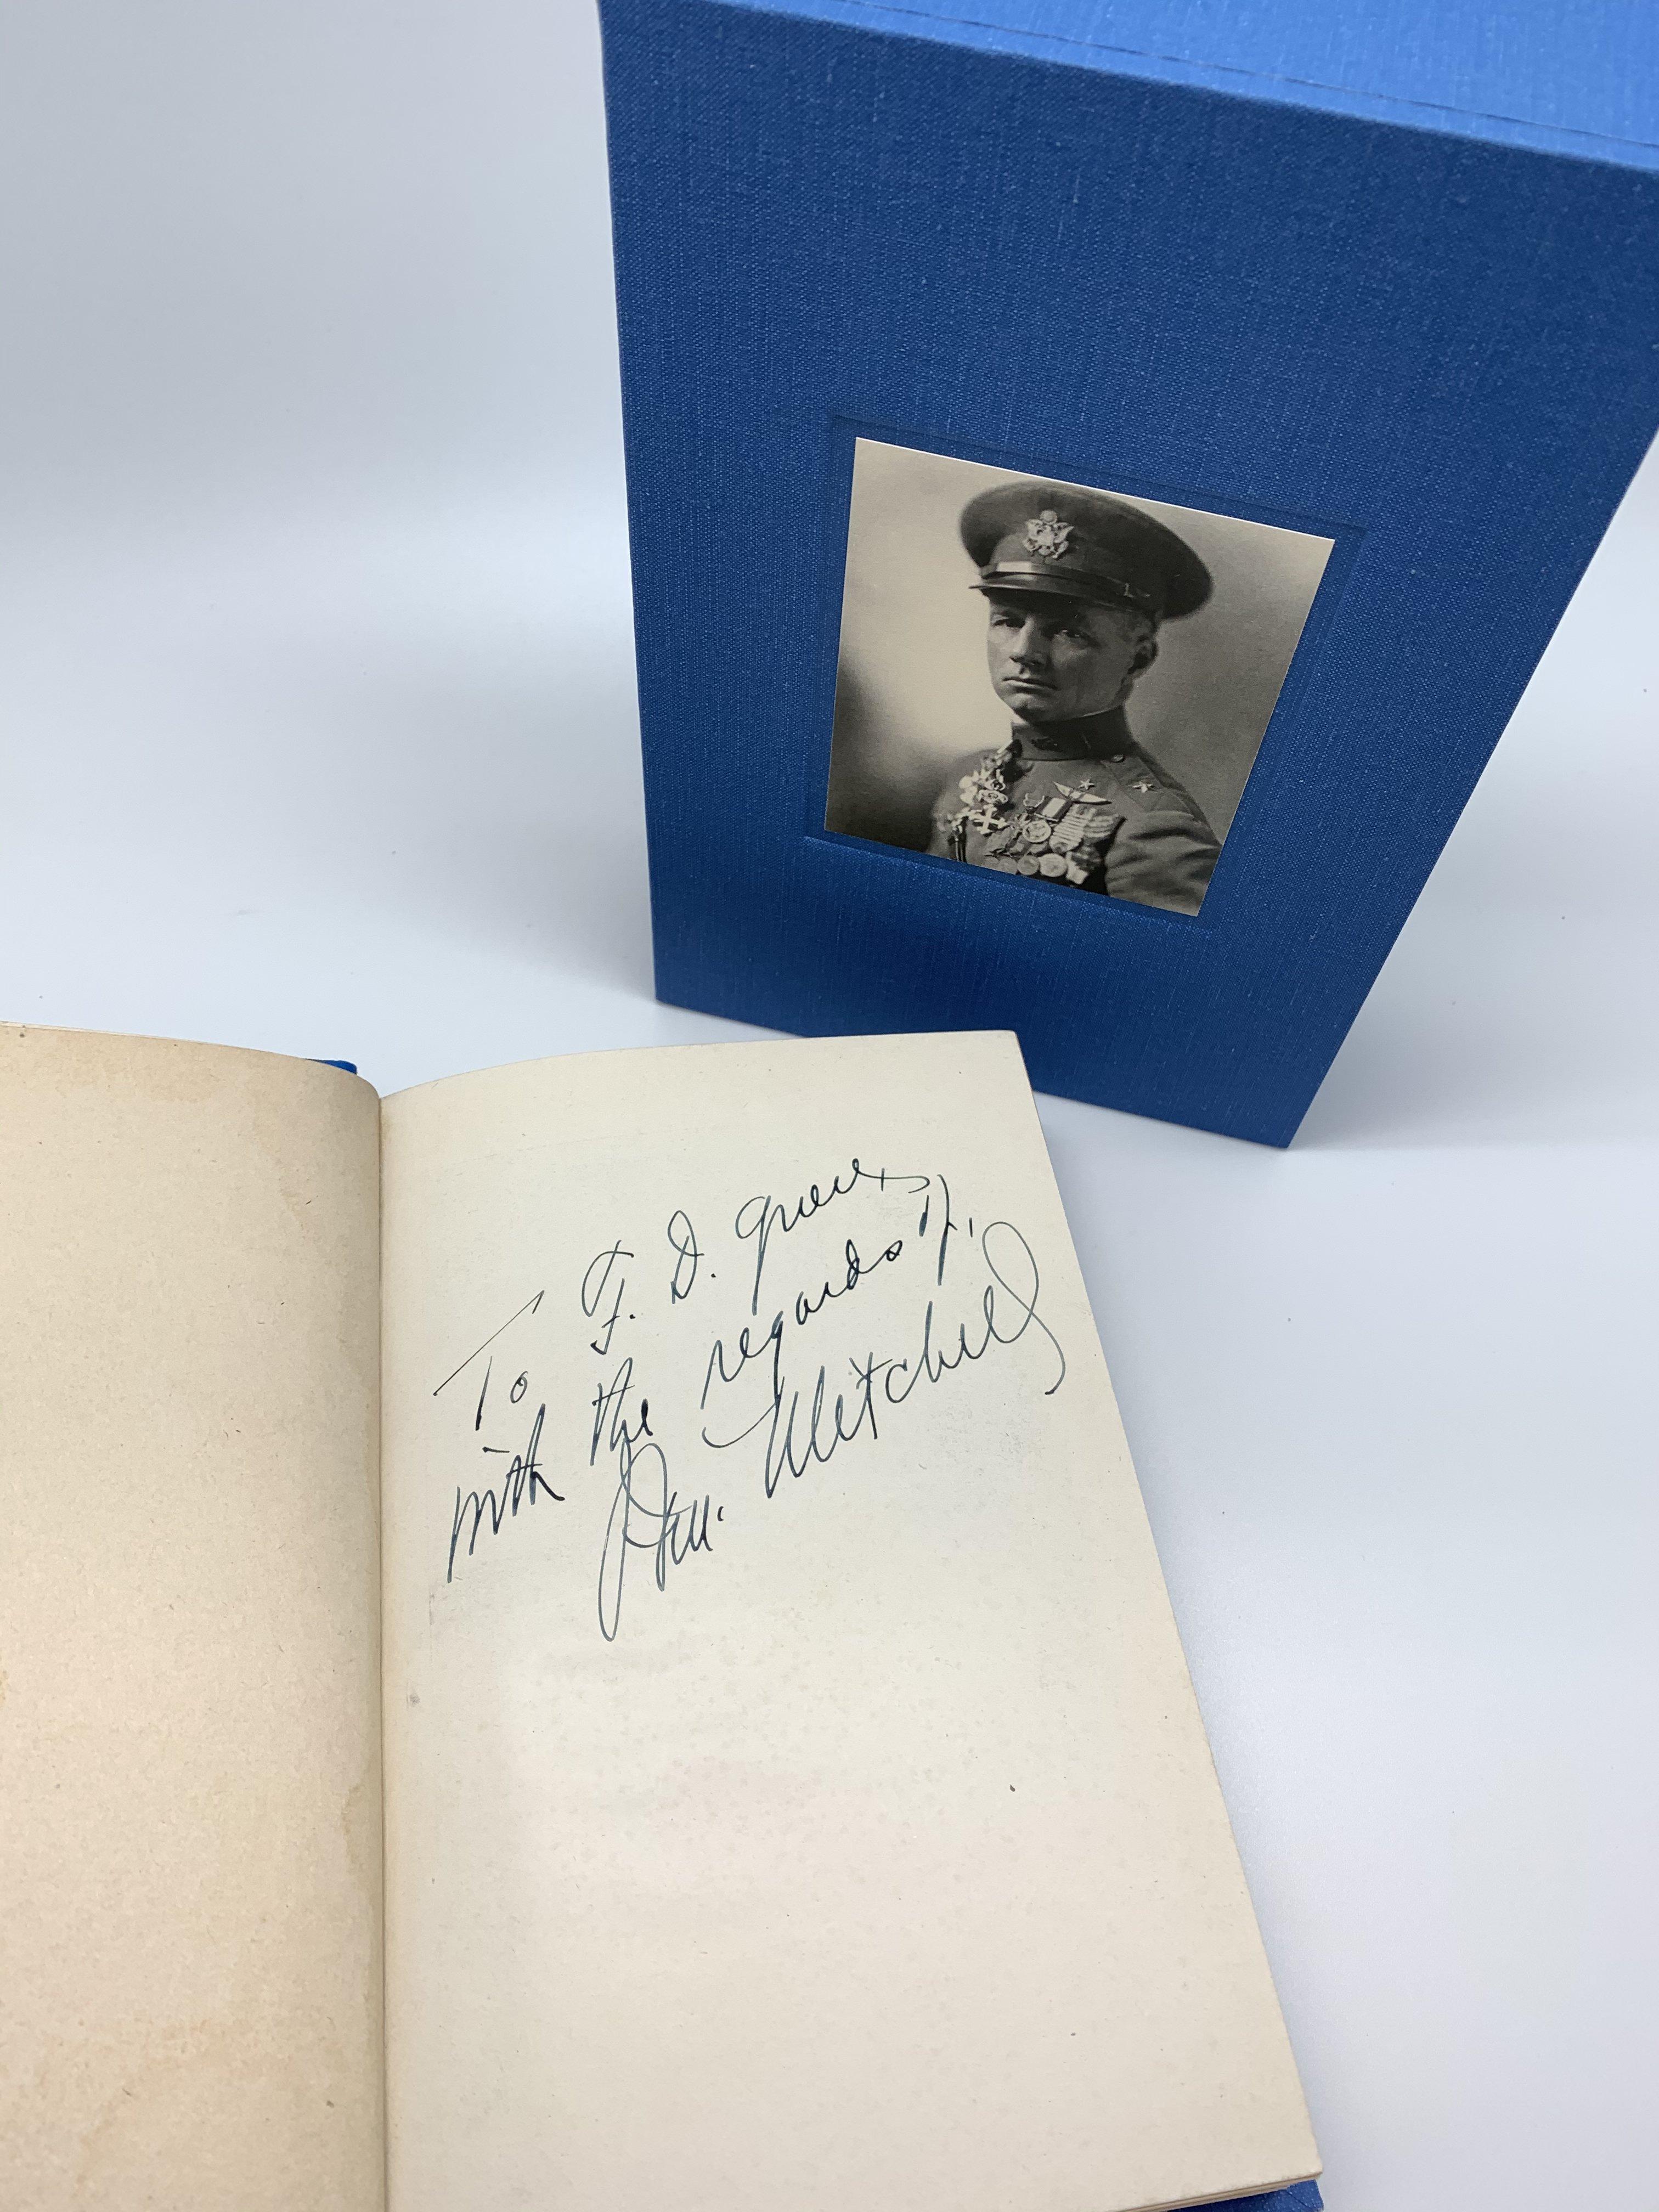 Mitchell, William. Our Air Force: The Keystone of National Defense. New York: E. P. Dutton & Co., 1921. Signed and inscribed by Mitchell. First edition, later printing. Rebound and housed in archival slipcase. 

Presented is a first edition of Our